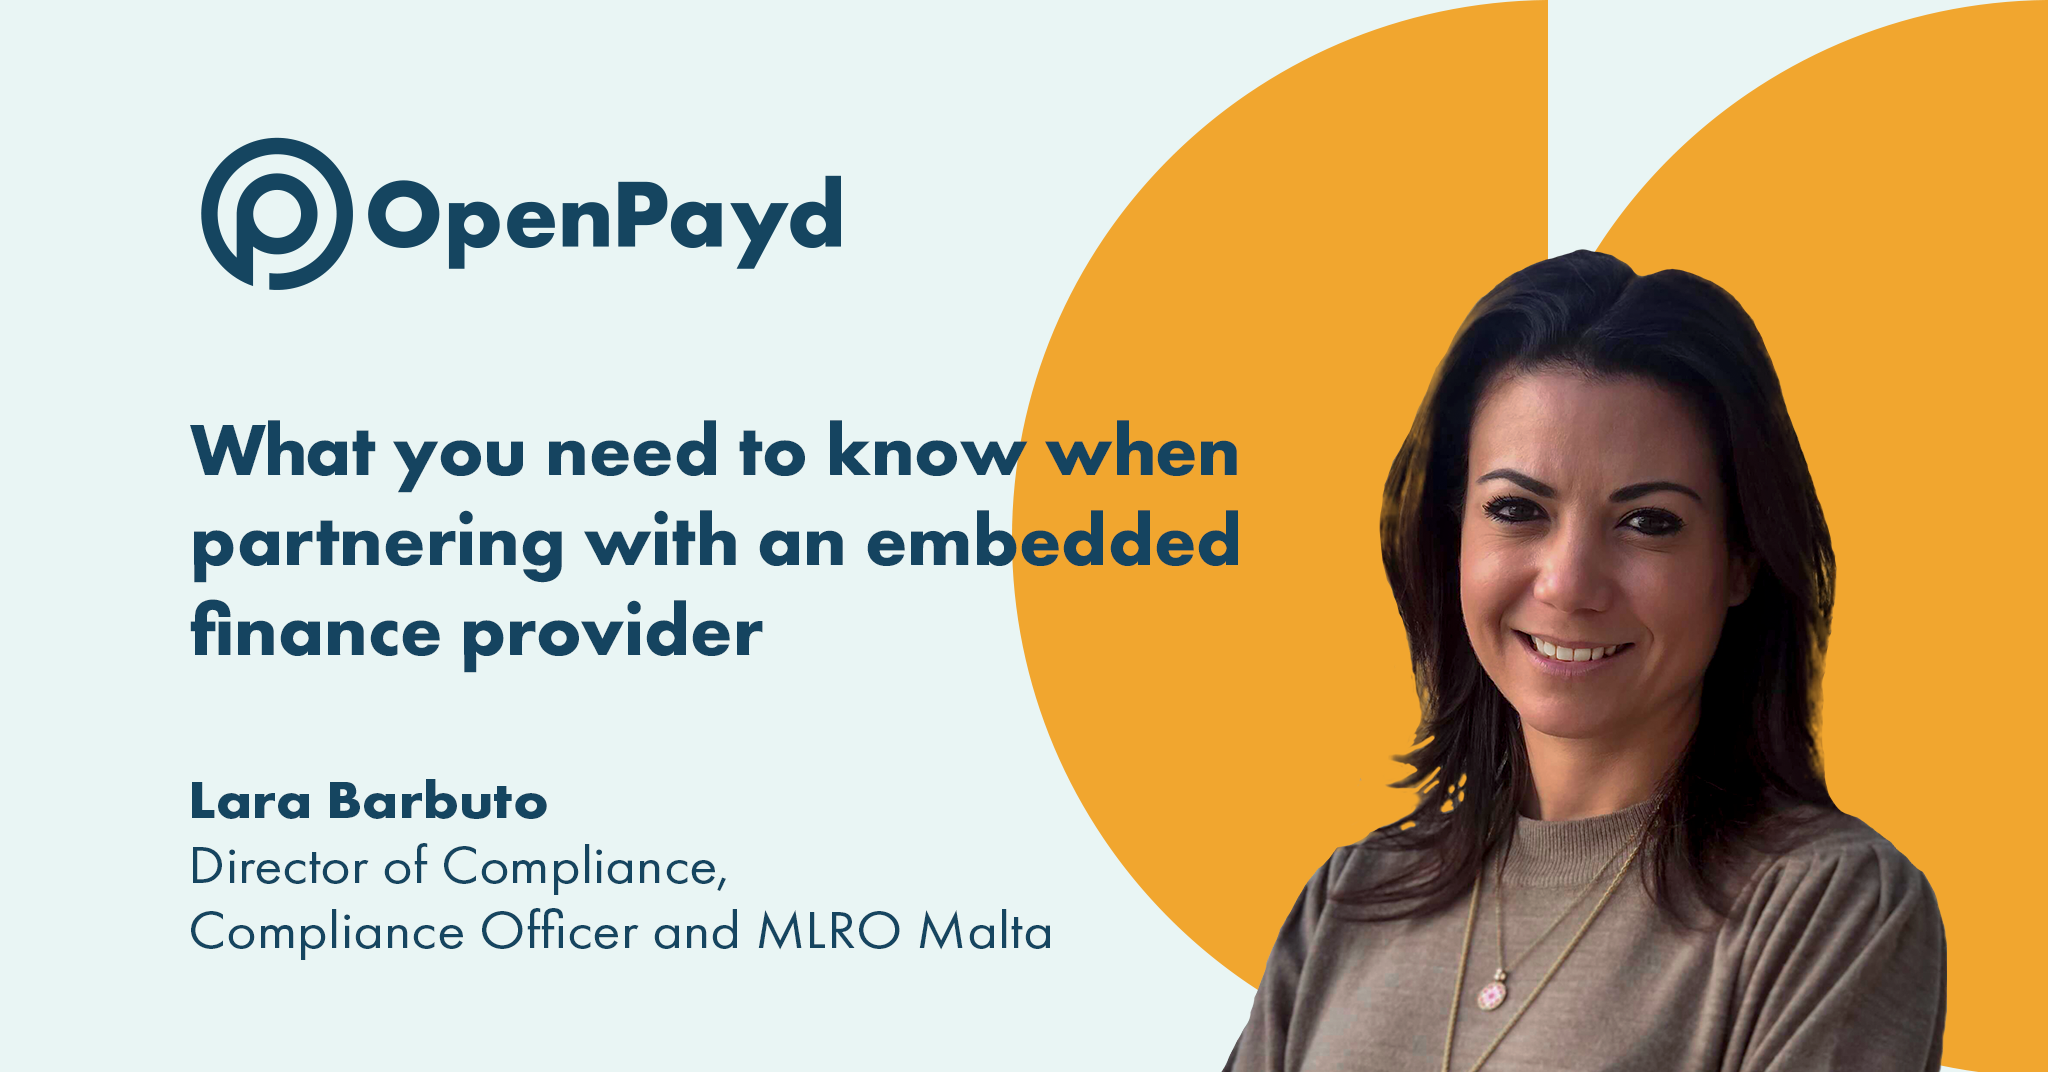 Lara Barbuto - Everything you need to know about partnering with an embedded finance provider- from a compliance perspective